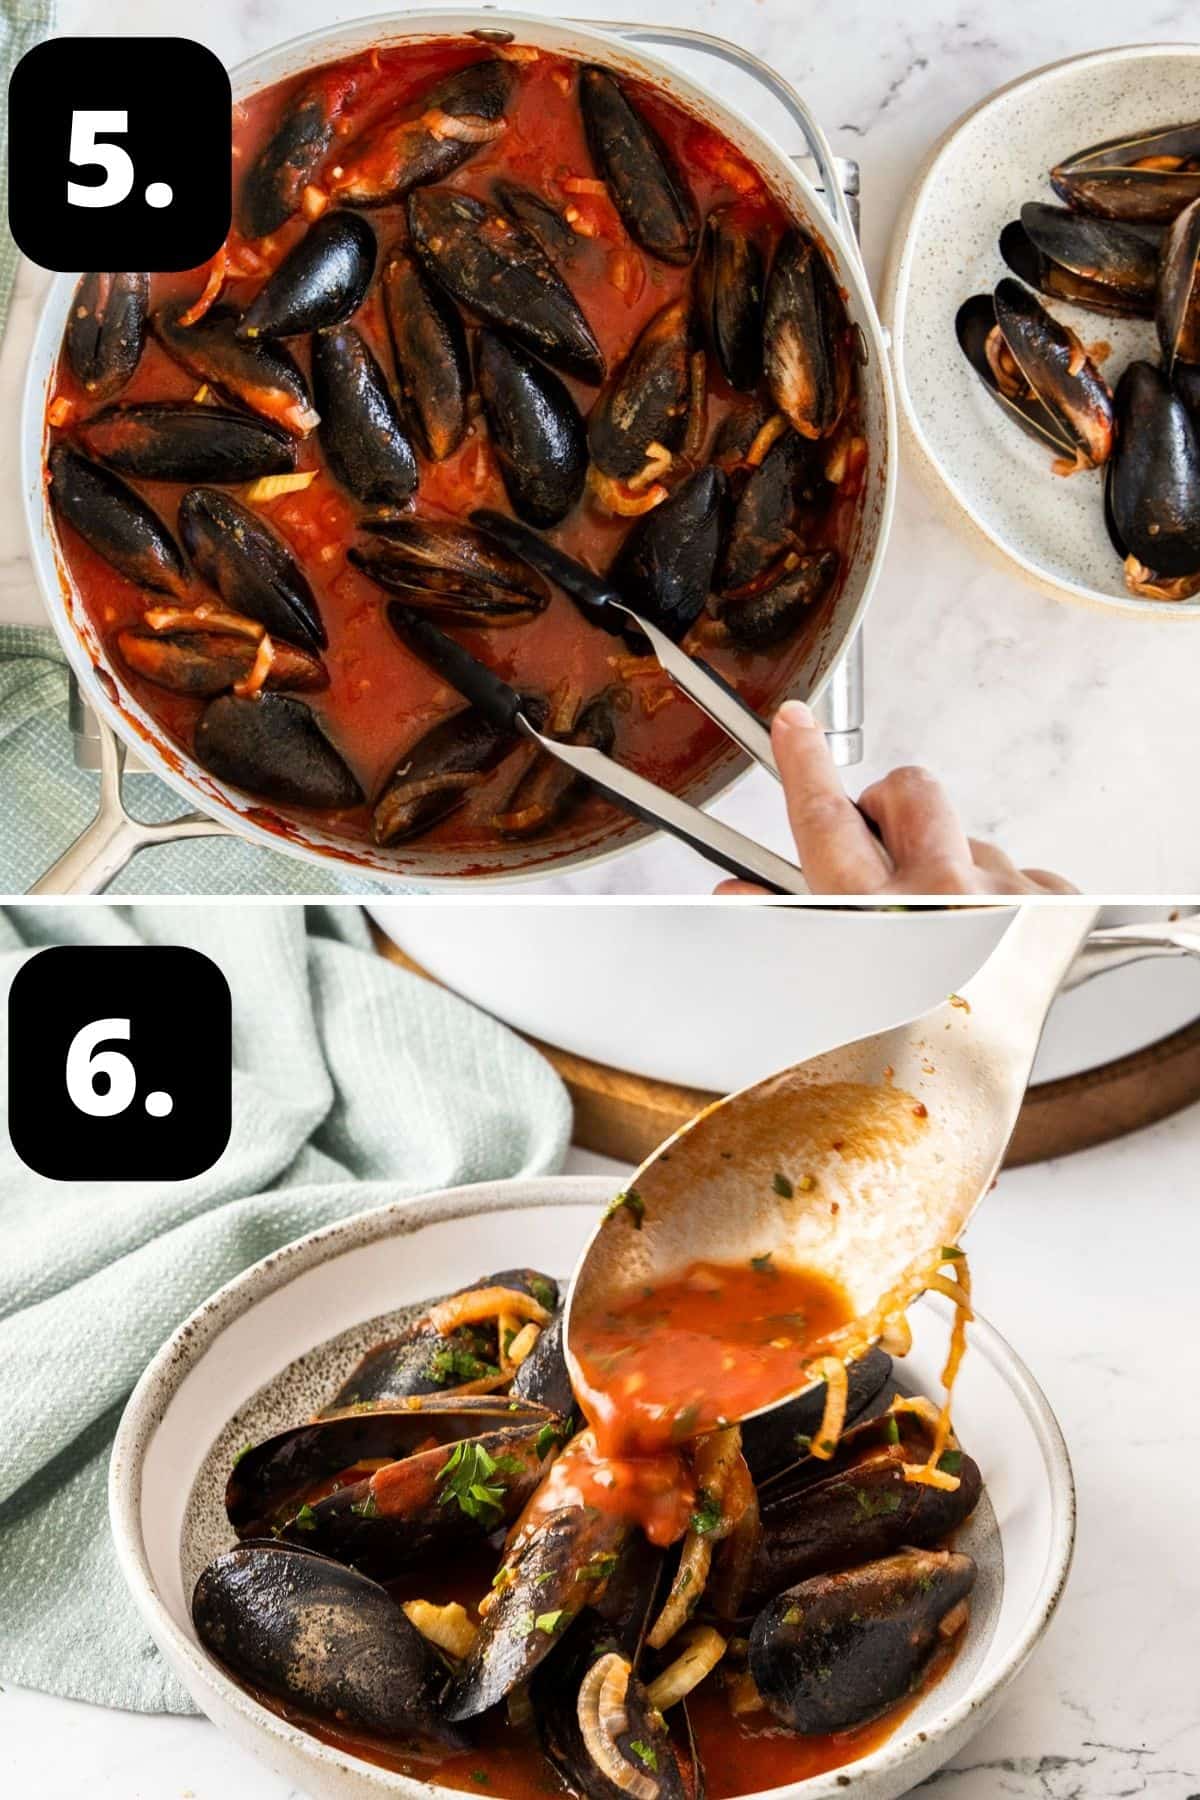 Steps 5-6 of preparing this recipe: removing the mussels as they open and are cooked, and serving the mussels.